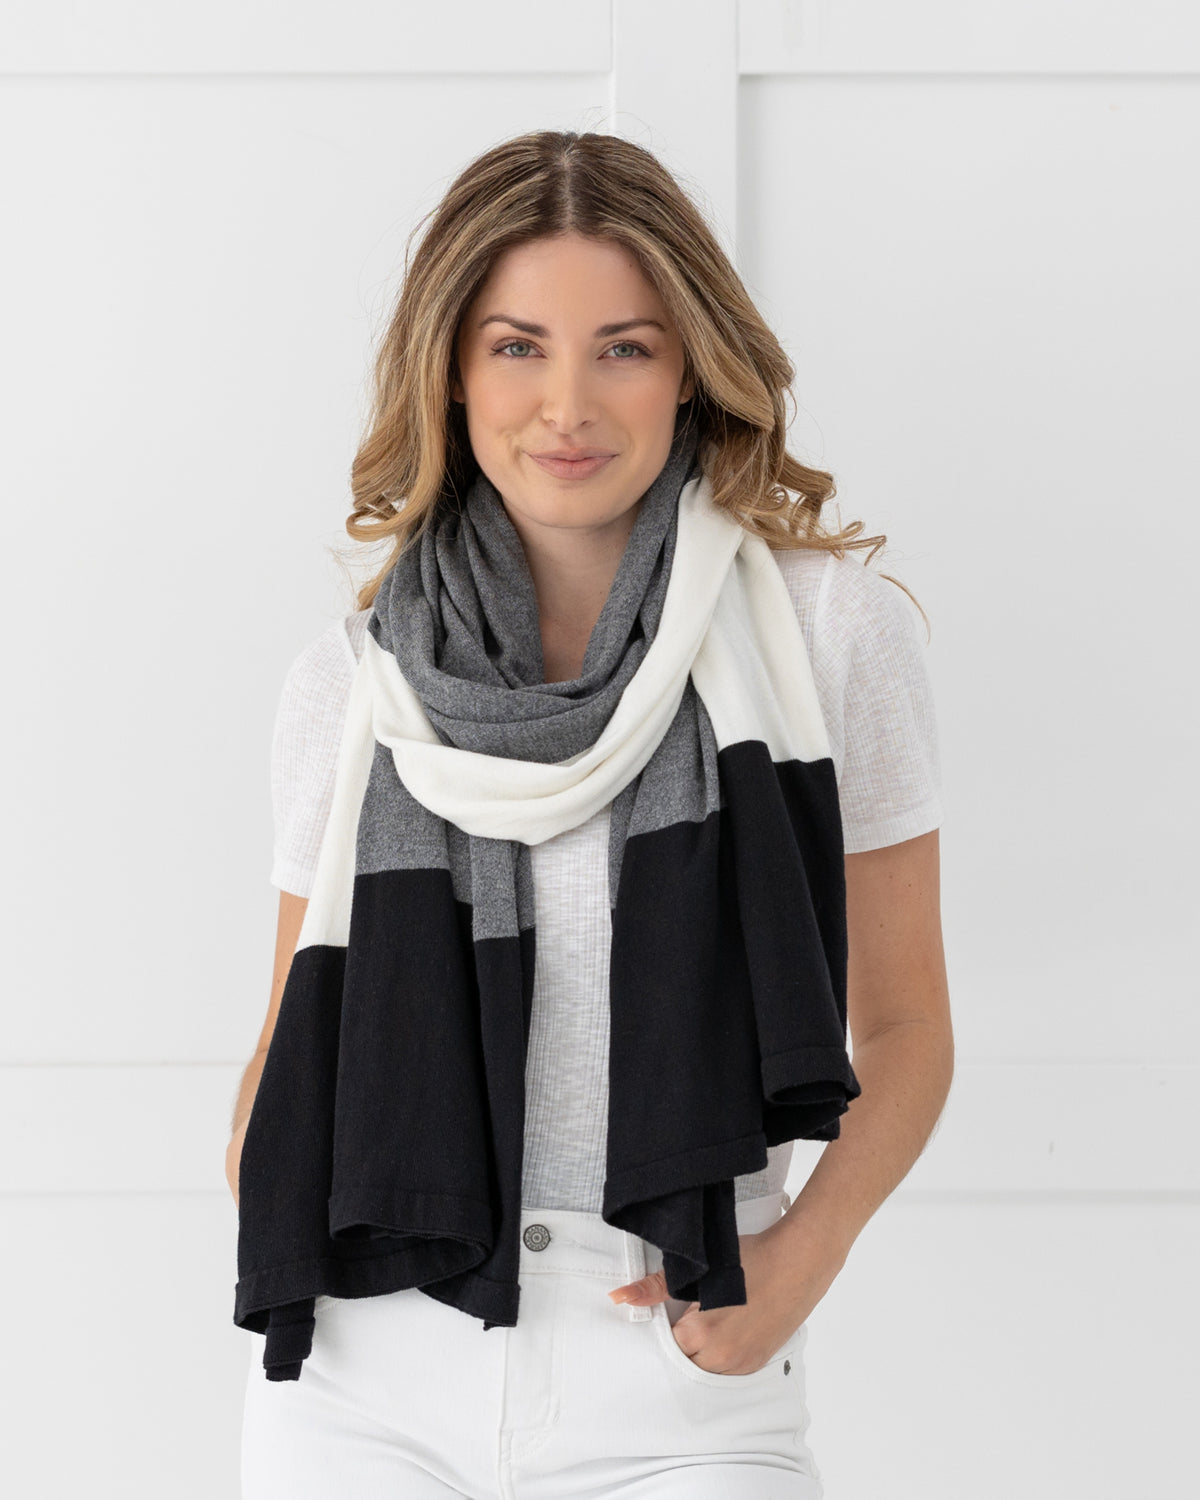 Woman wearing the Dreamsoft Travel Scarf in Gray Colorblock which is a black, gray and cream scarf, while looking at the camera with hands in her pant pockets